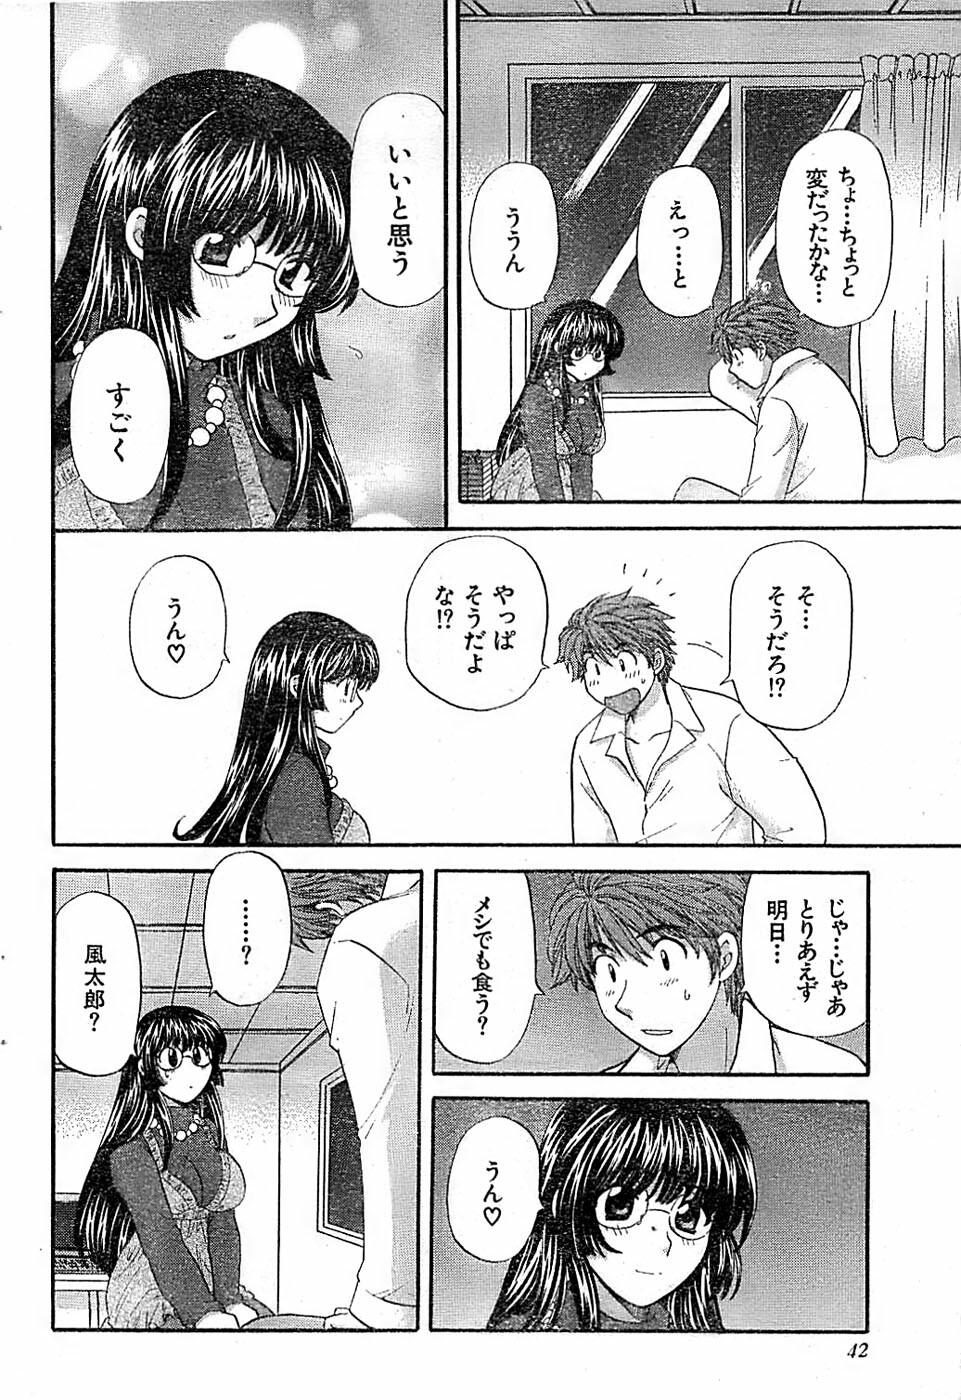 Doki! Special 2006-04 page 42 full